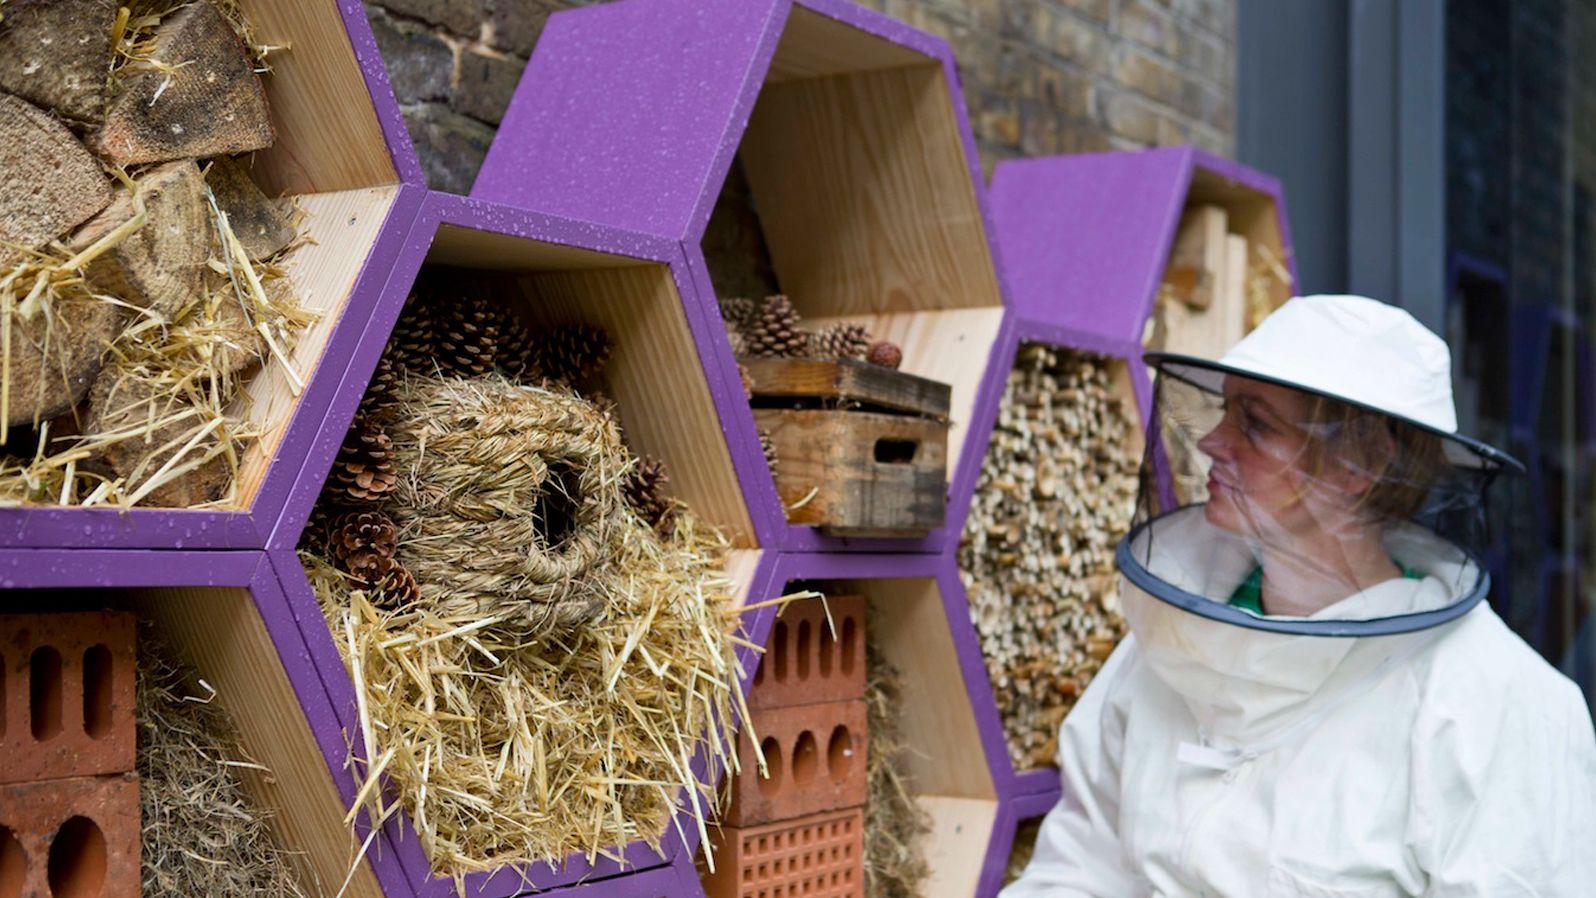 Befriend local beekeepers who practice safe hive care.